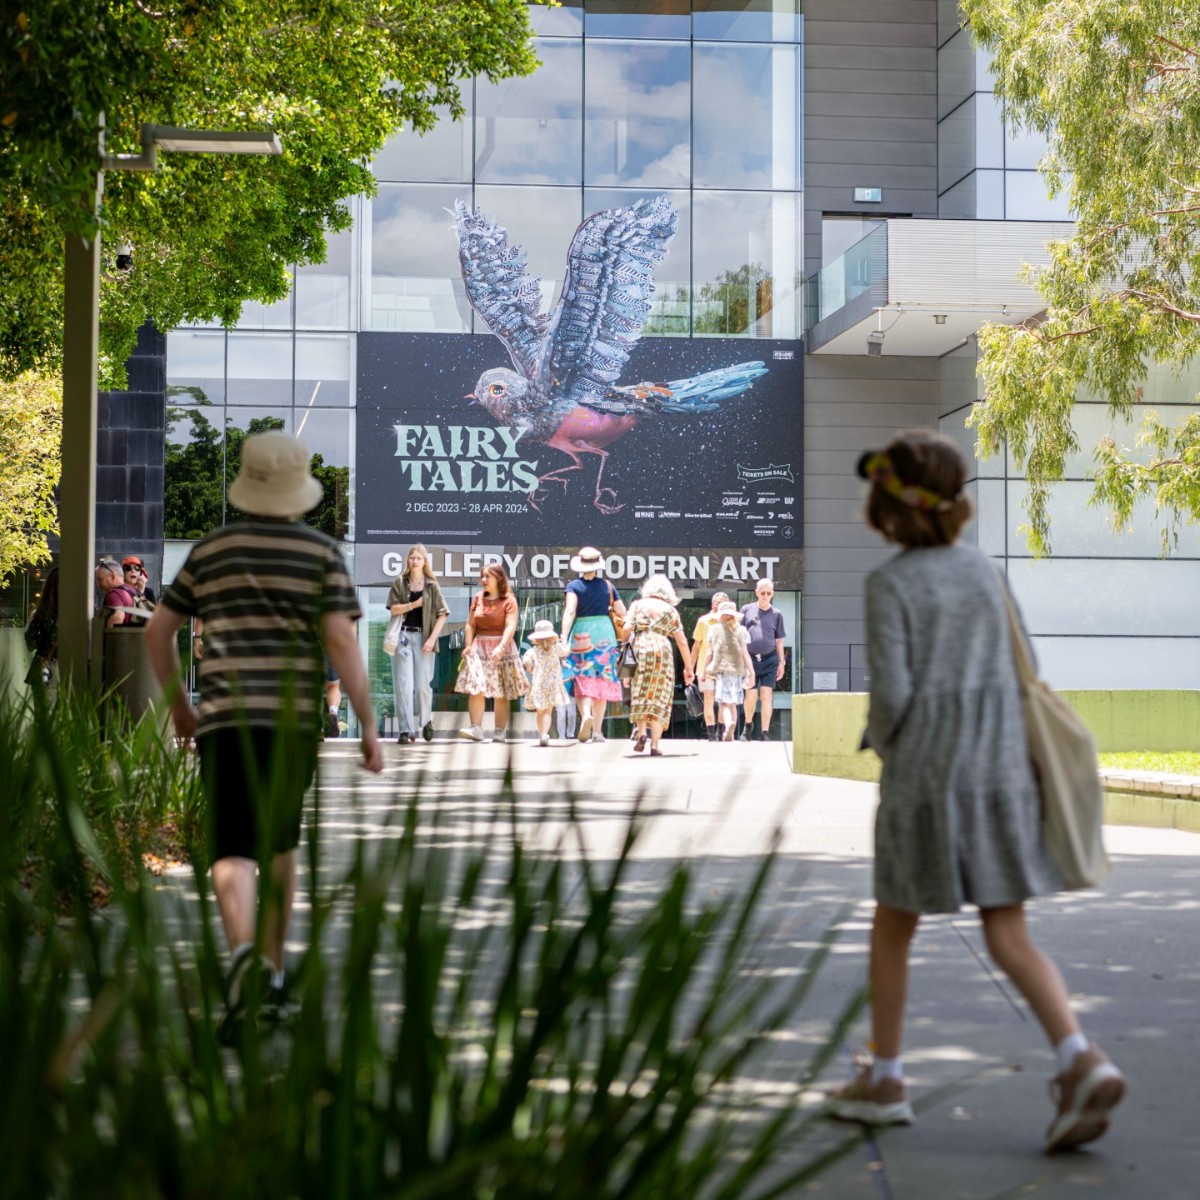 QAGOMA is open from 12 noon today on ANZAC Day until 5.00pm. 👋 Drop by QAG and GOMA this afternoon, won't you? Final days! 'Fairy Tales' ends on Sun 28 Apr. See what's on and plan your visit 🔗 brnw.ch/21wJ9bX #QAGOMA #FairyTalesGOMA #visitbrisbane #thisisqueensland